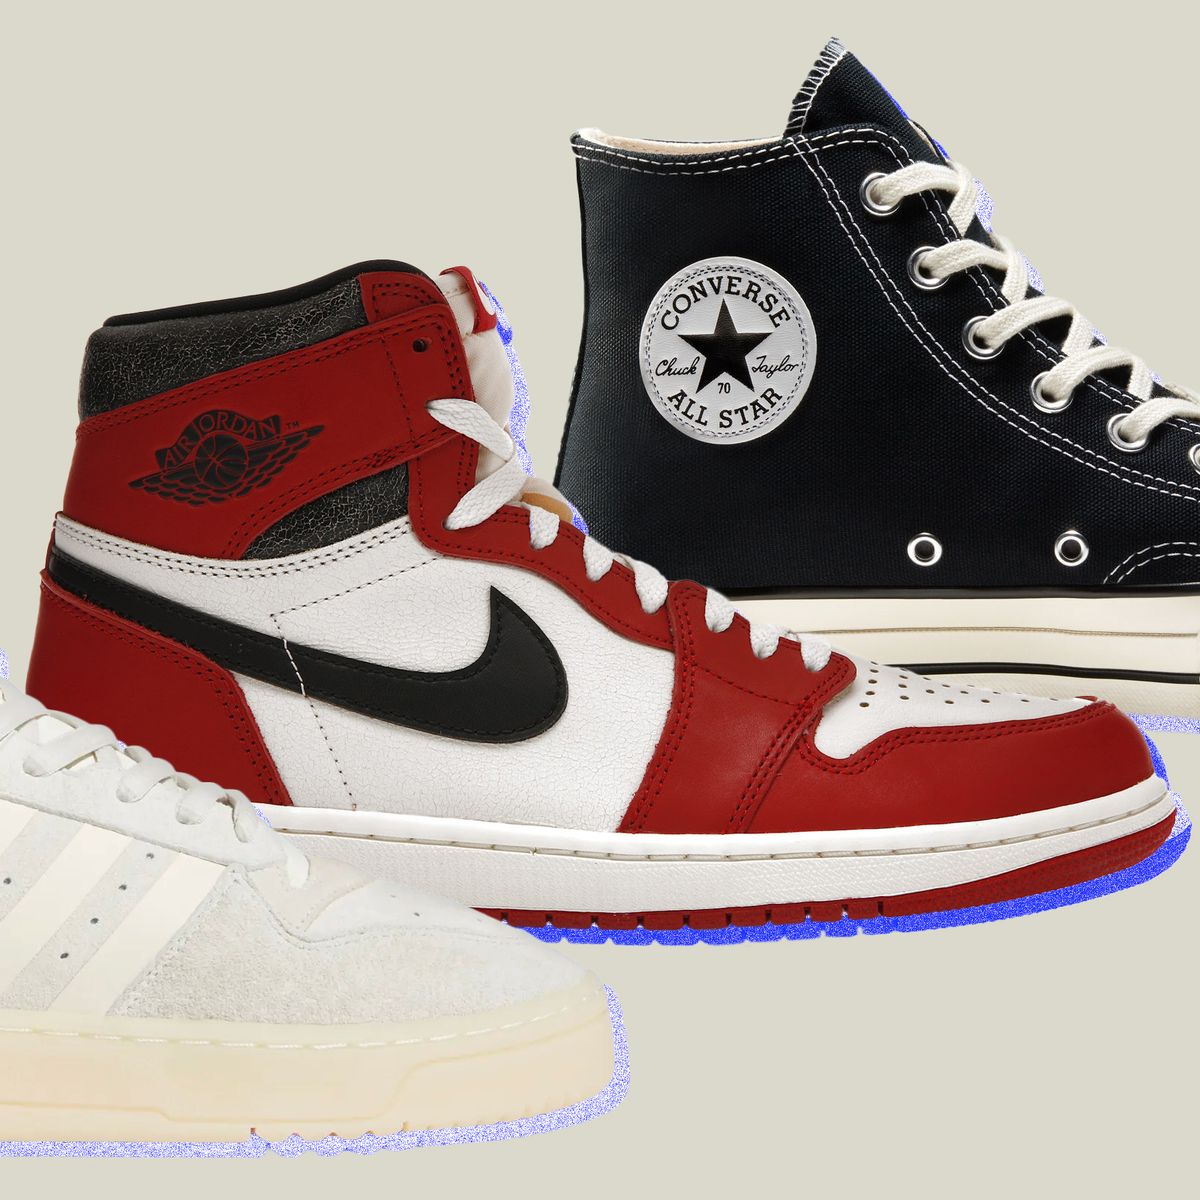 The Best High-Top Sneakers to Take Your Style to New Heights